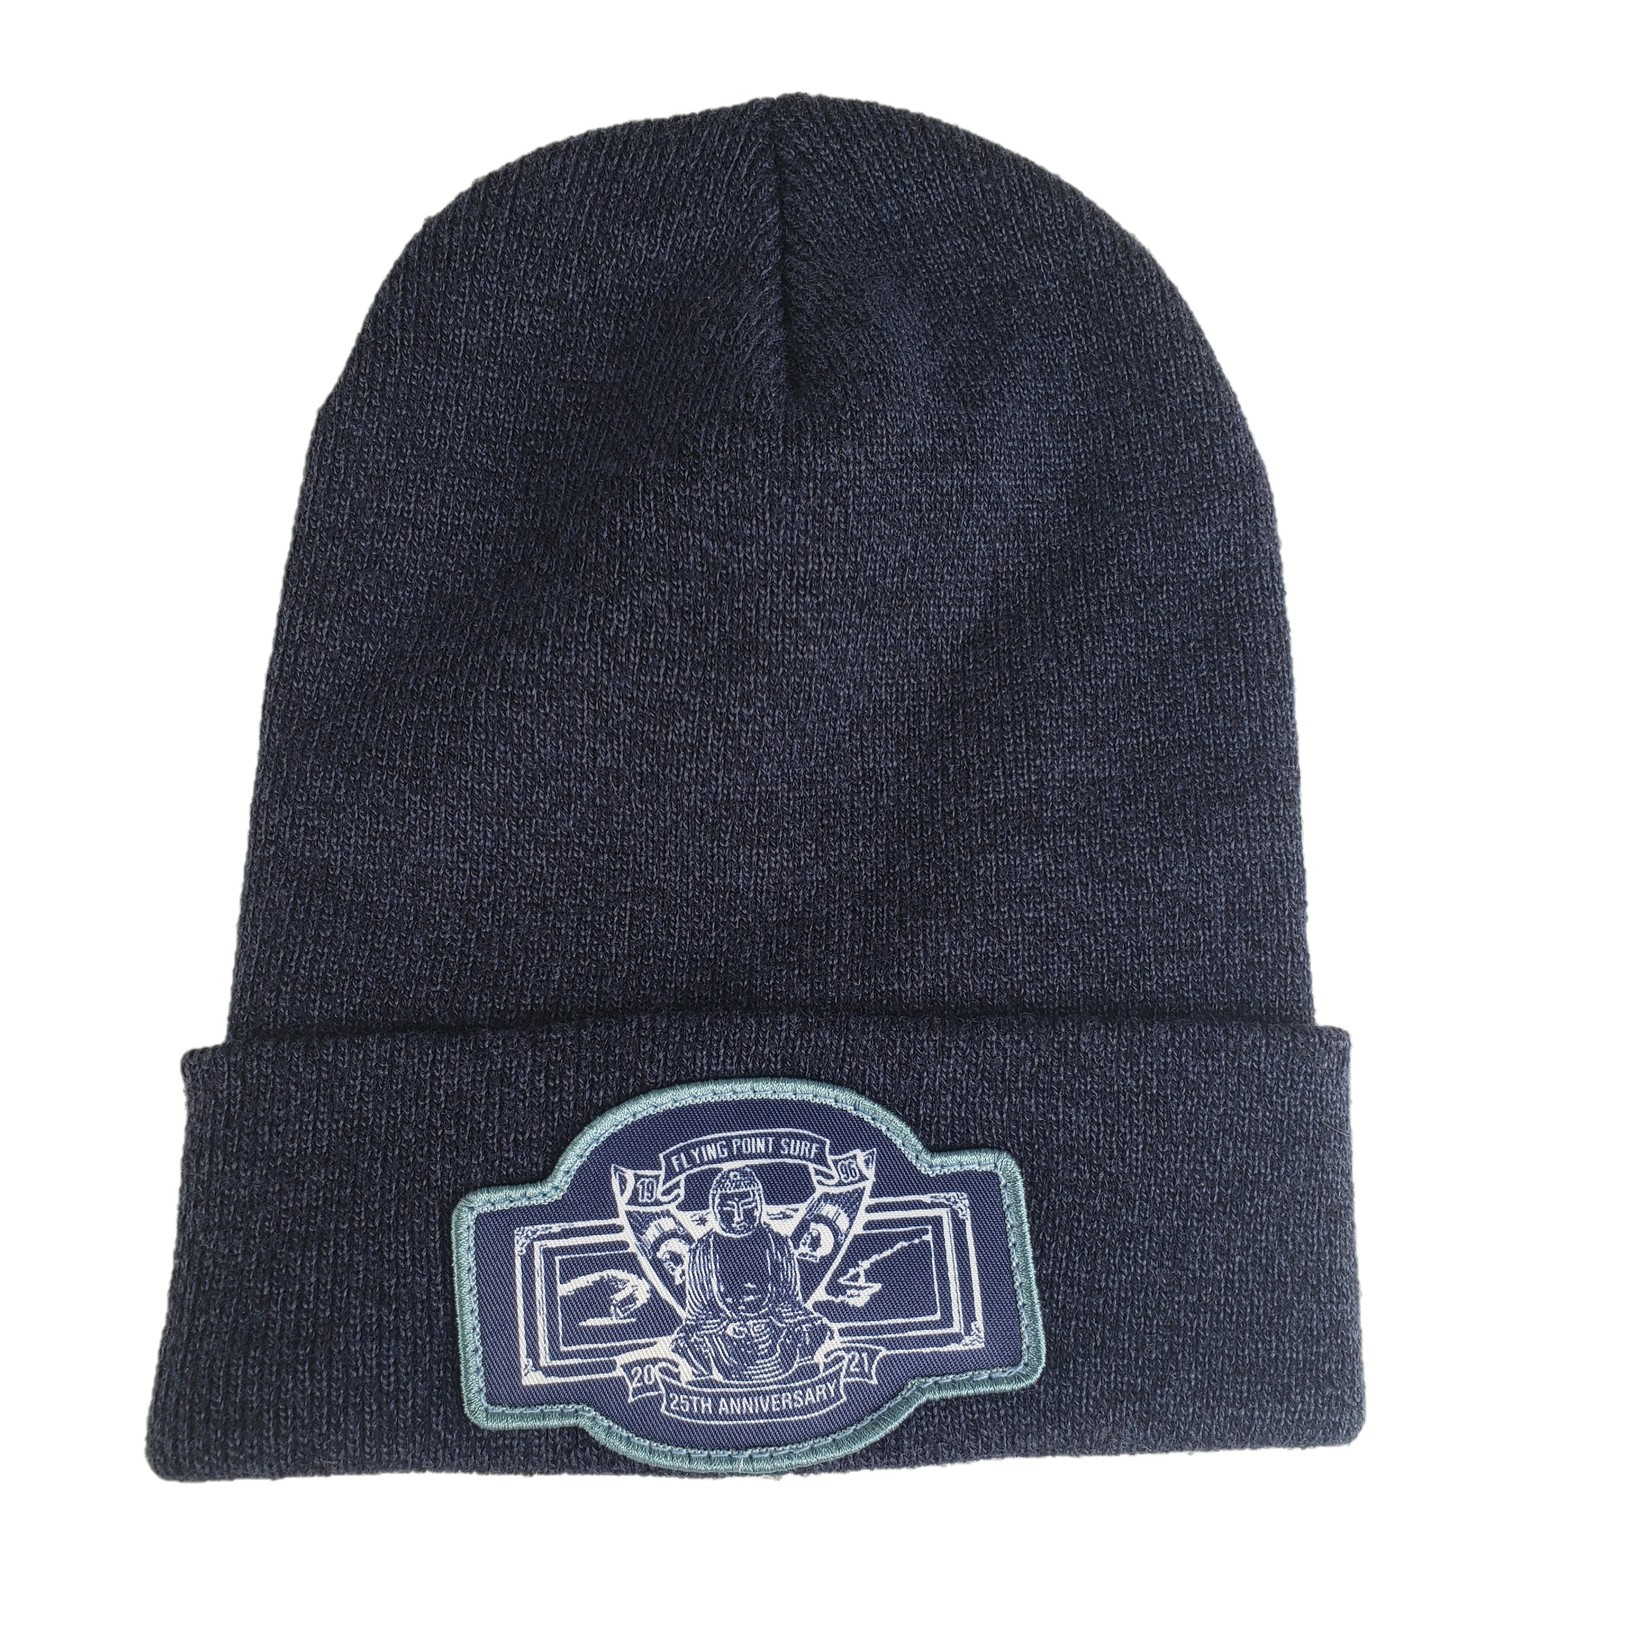 Flying Point 25th Anniversary Beanie